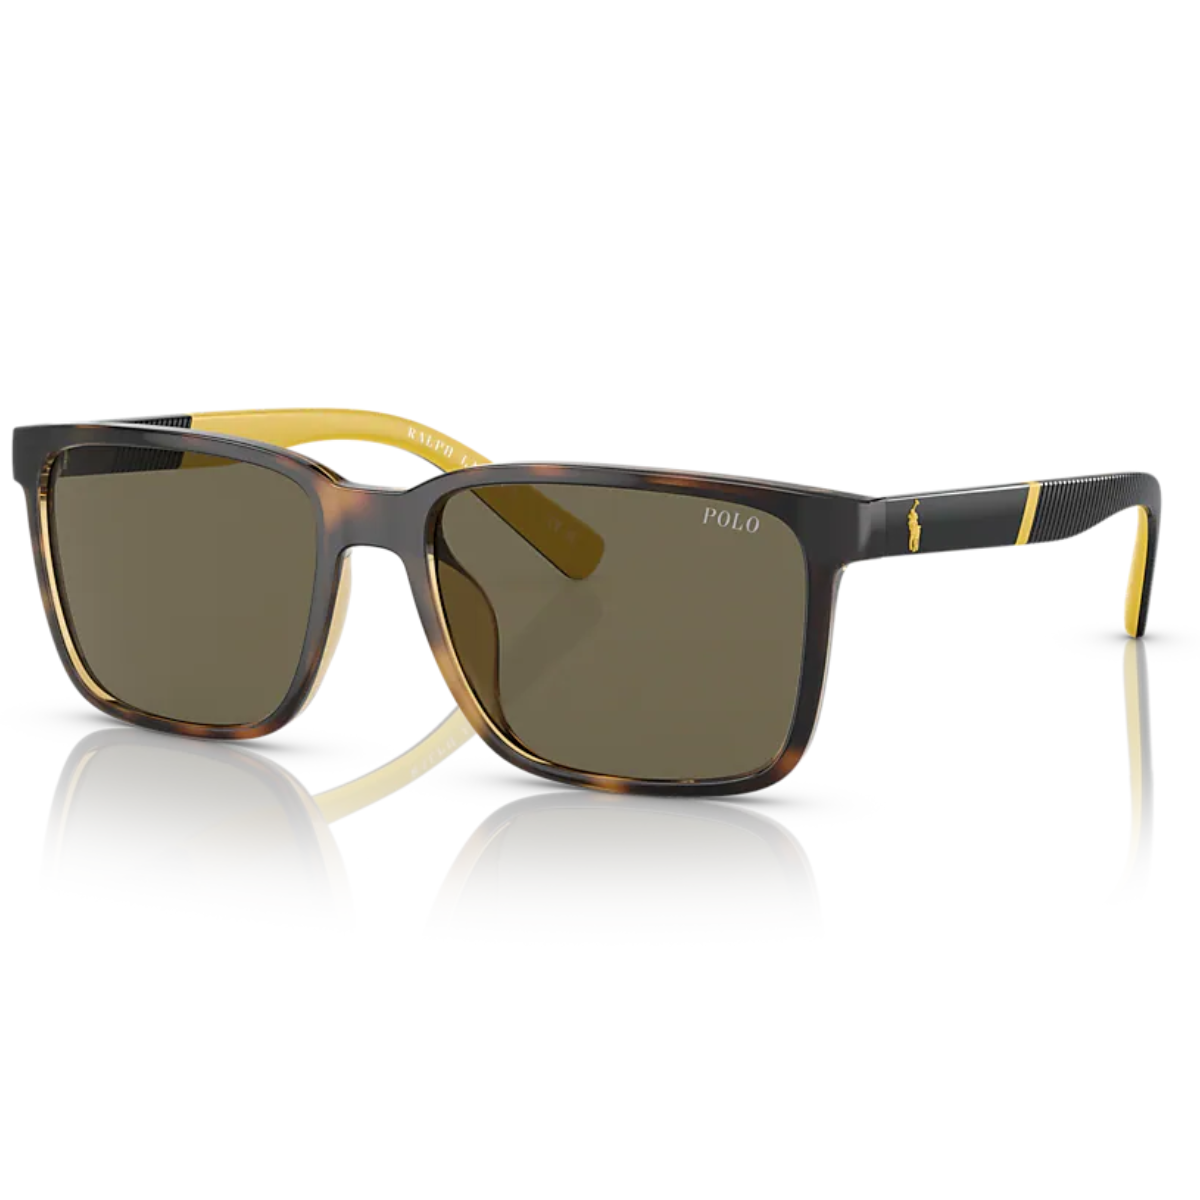 "Shop the trendy Ralph Lauren Polo 4189U Sunglasses for Men at Optorium. Square frames, light yellow and light grey lenses, non-polarized, black and yellow/red temples."